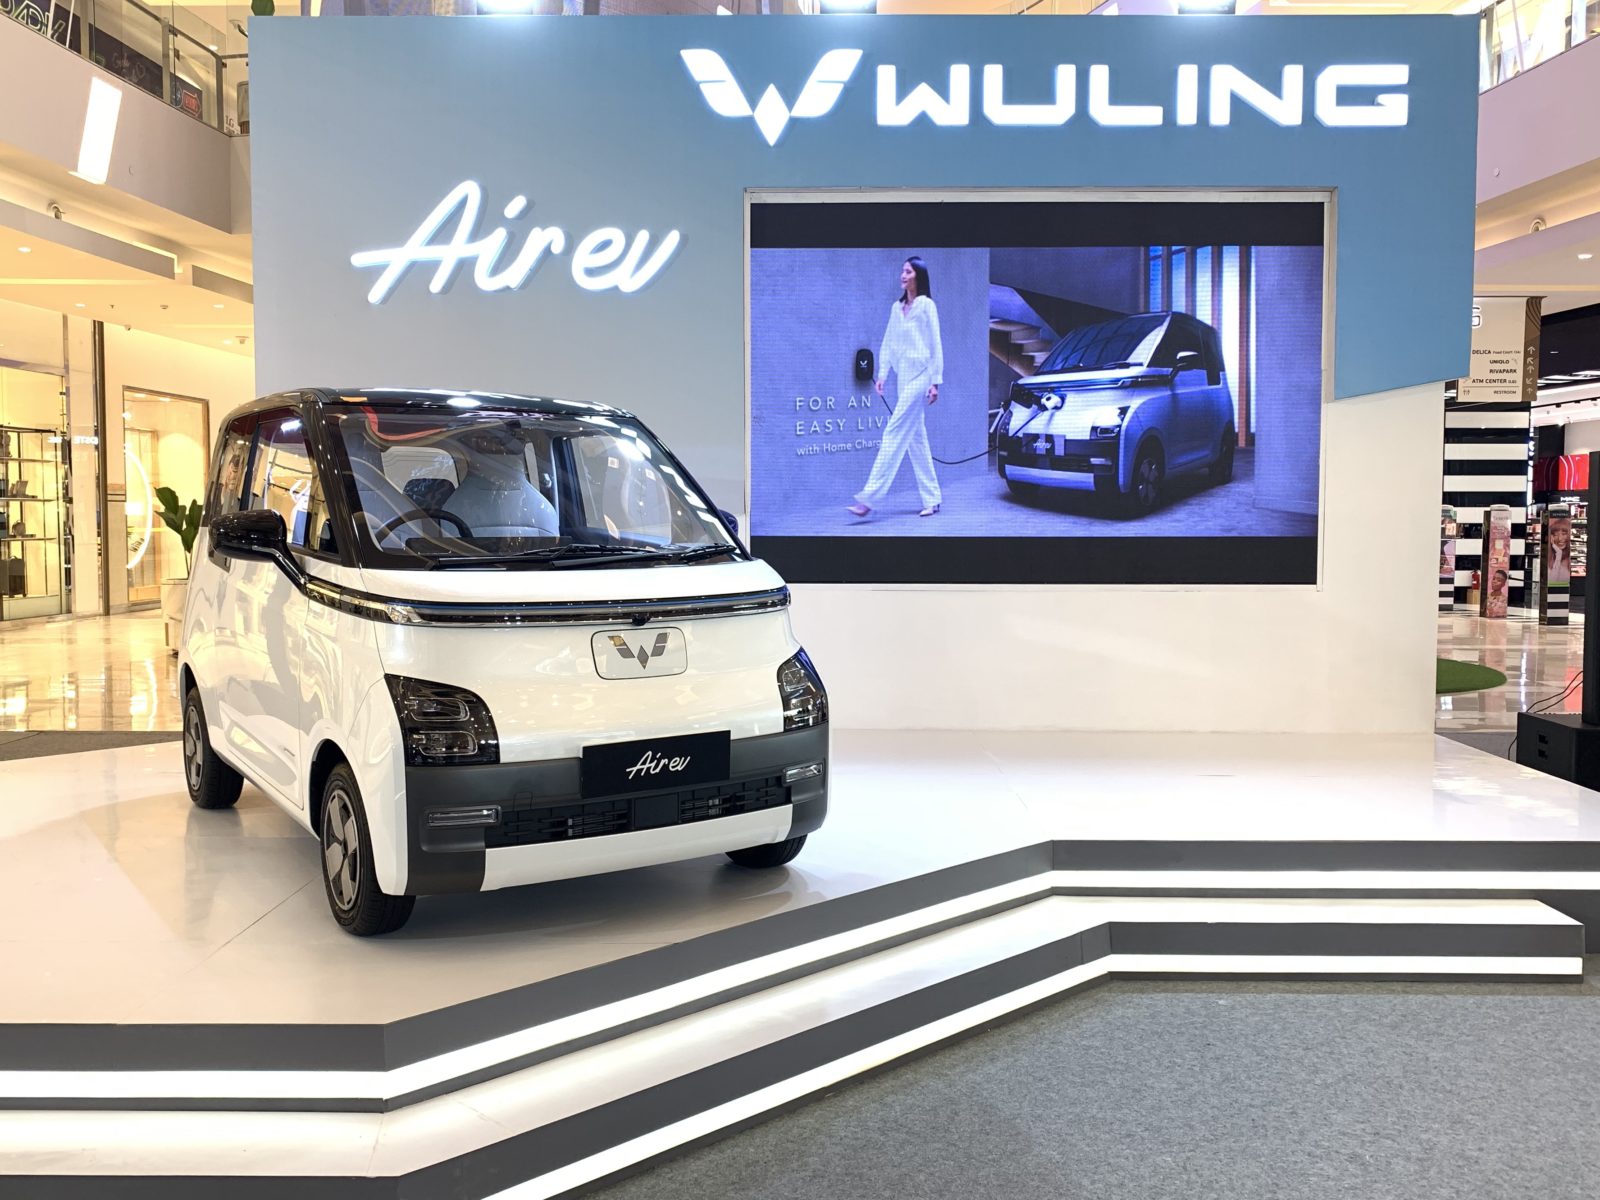 Image Wuling’s First Electric Car in Indonesia, Air ev, Officially Launched in Medan